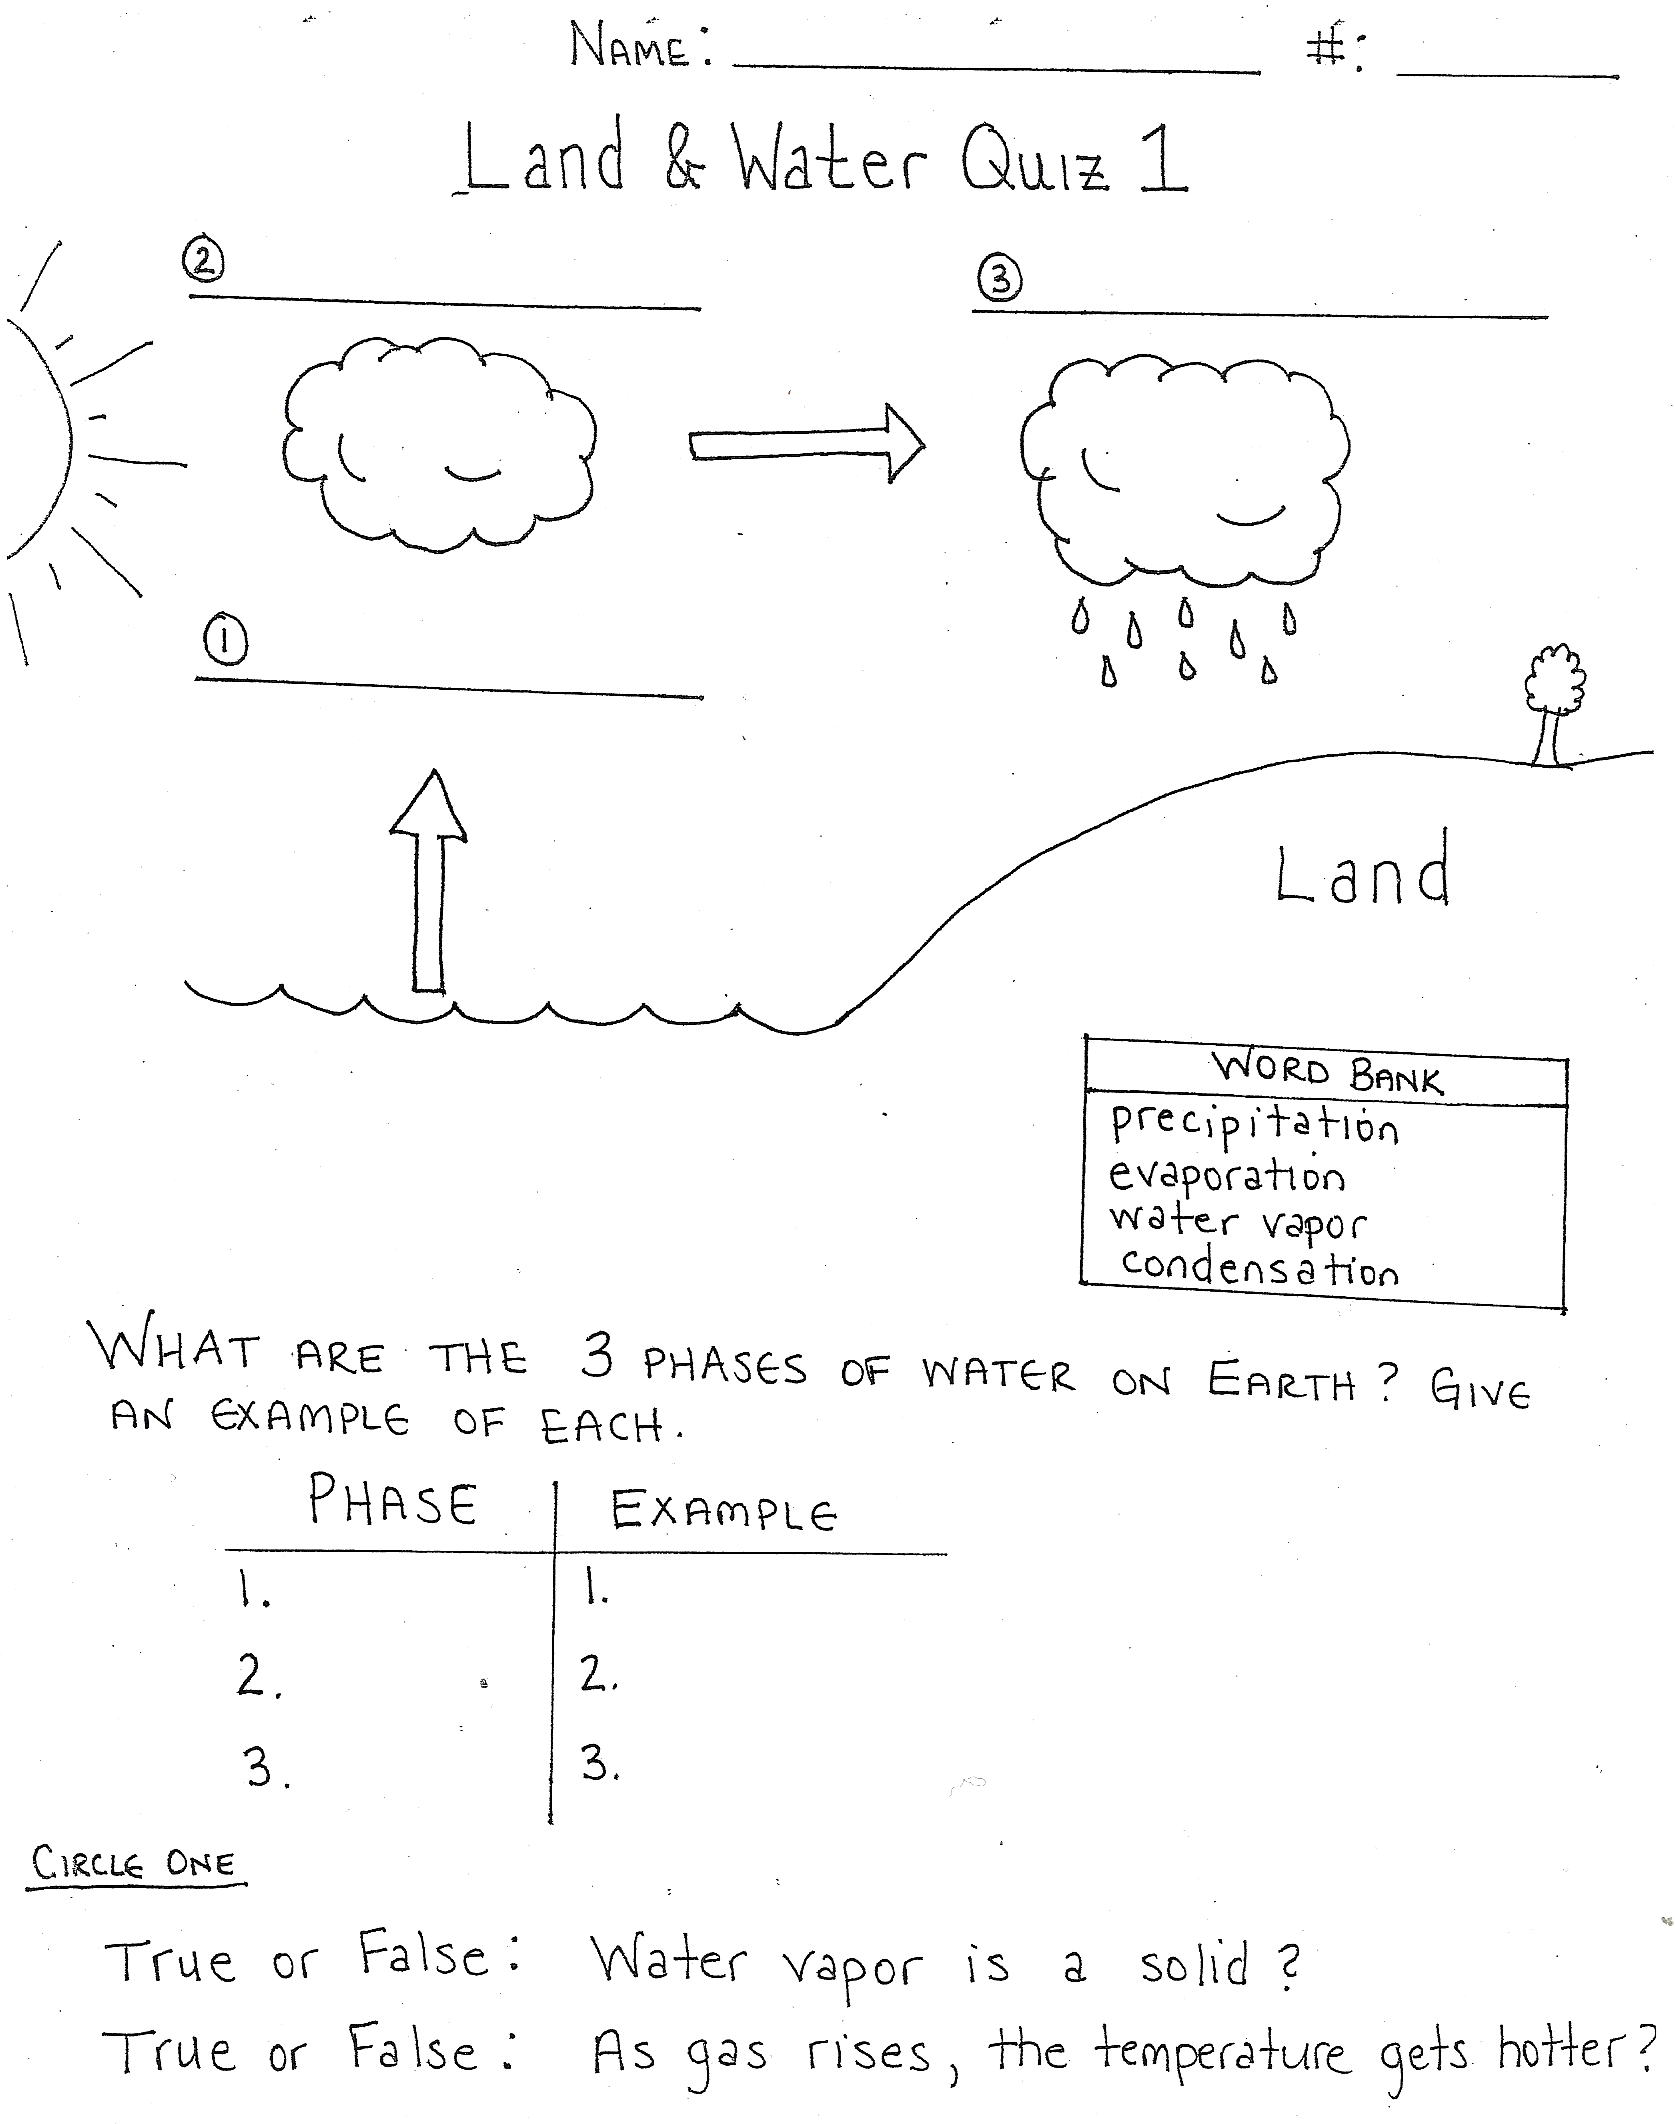 10 Best Images of Water Cycle Worksheet 5th Grade - Water Cycle